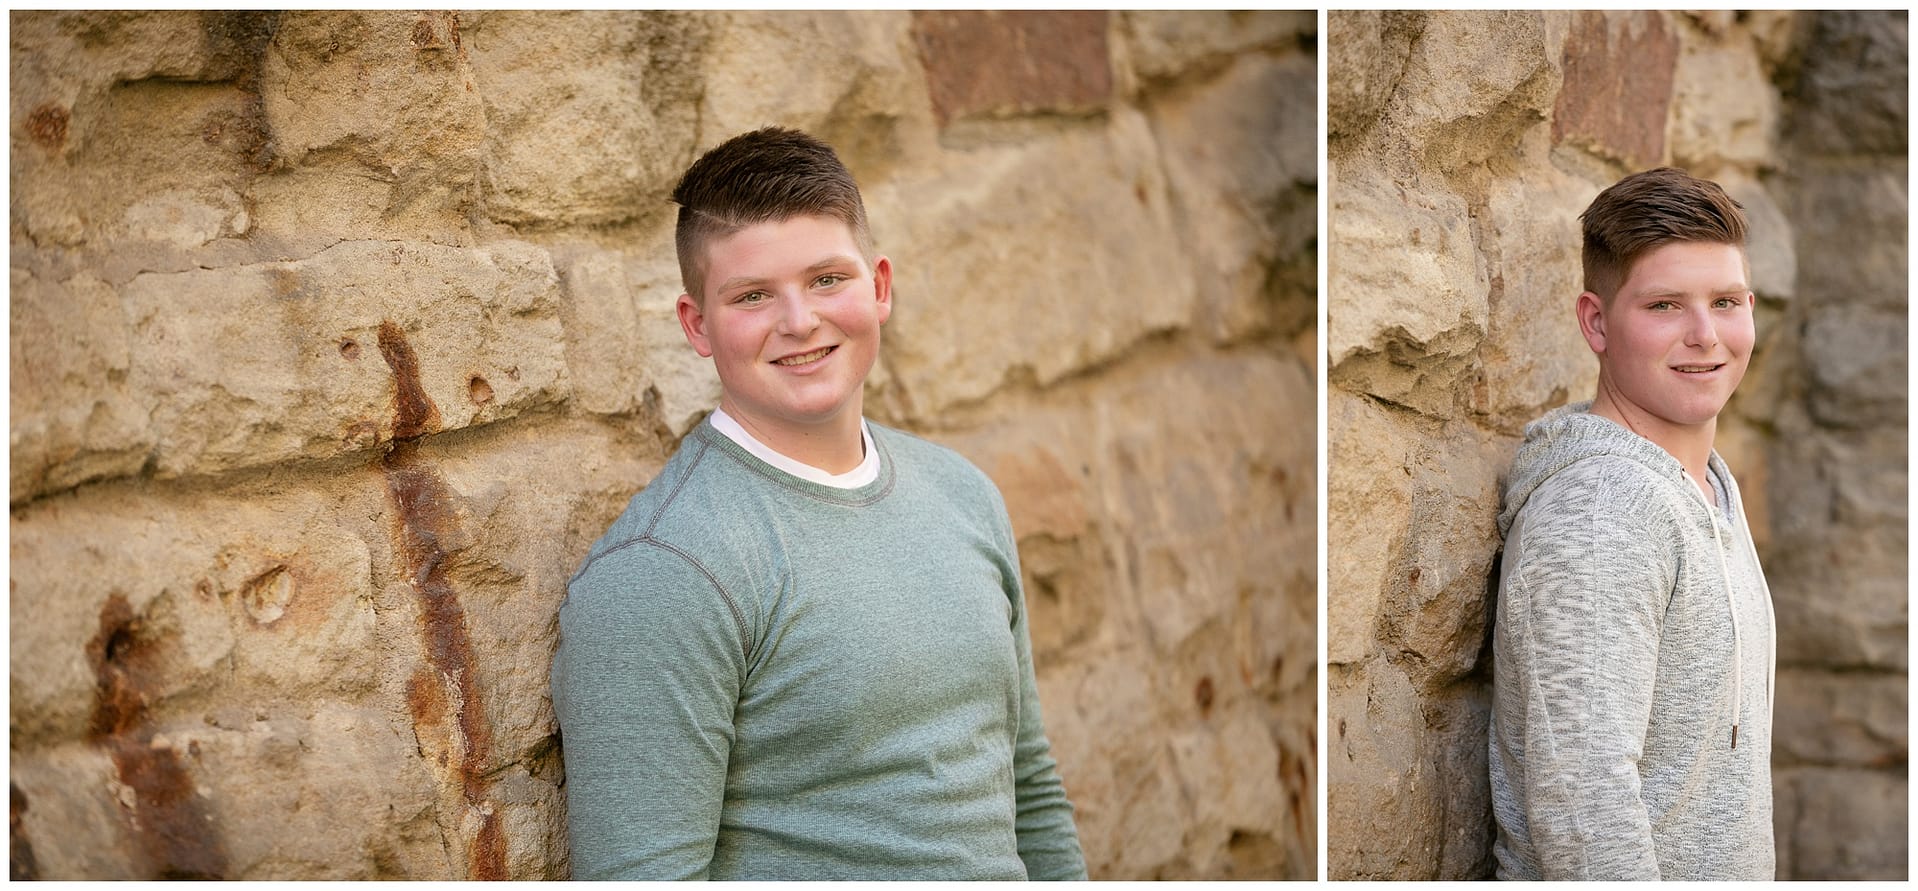 Twin brothers in side by side portraits. Photo by Tiffany Hix Photography.